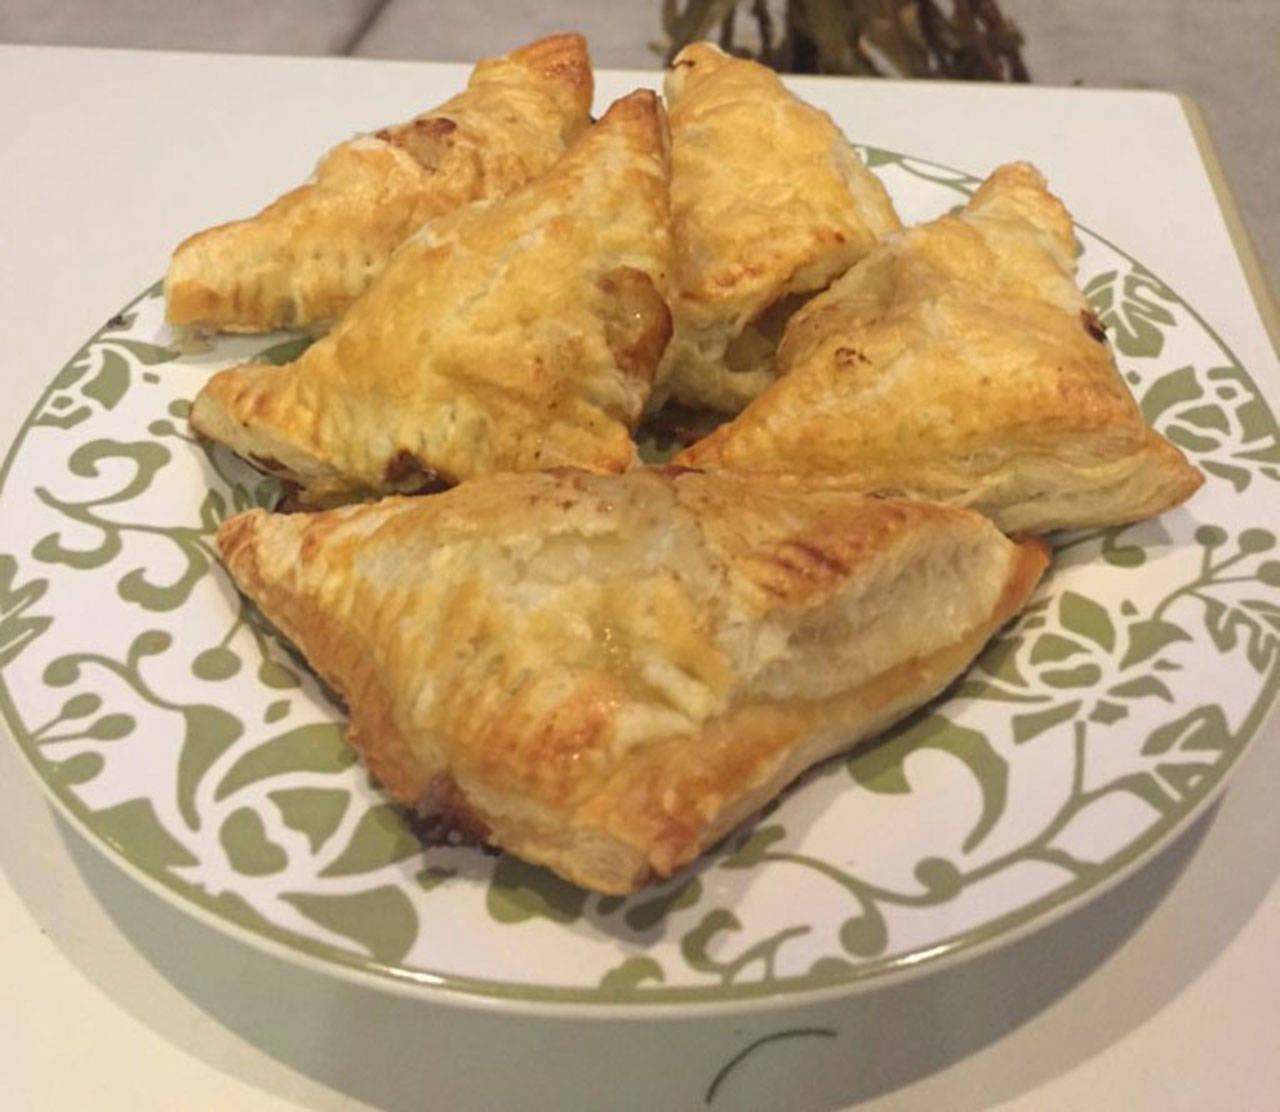 Two ripe pears — abundant on Vashon in the late summer and fall, and perhaps still stashed in more than a few islanders’ refrigerators — are called for in Lisa Cyra’s recipe for pear, leek and Gruyere cheese turnovers (Lisa Cyra Photo).